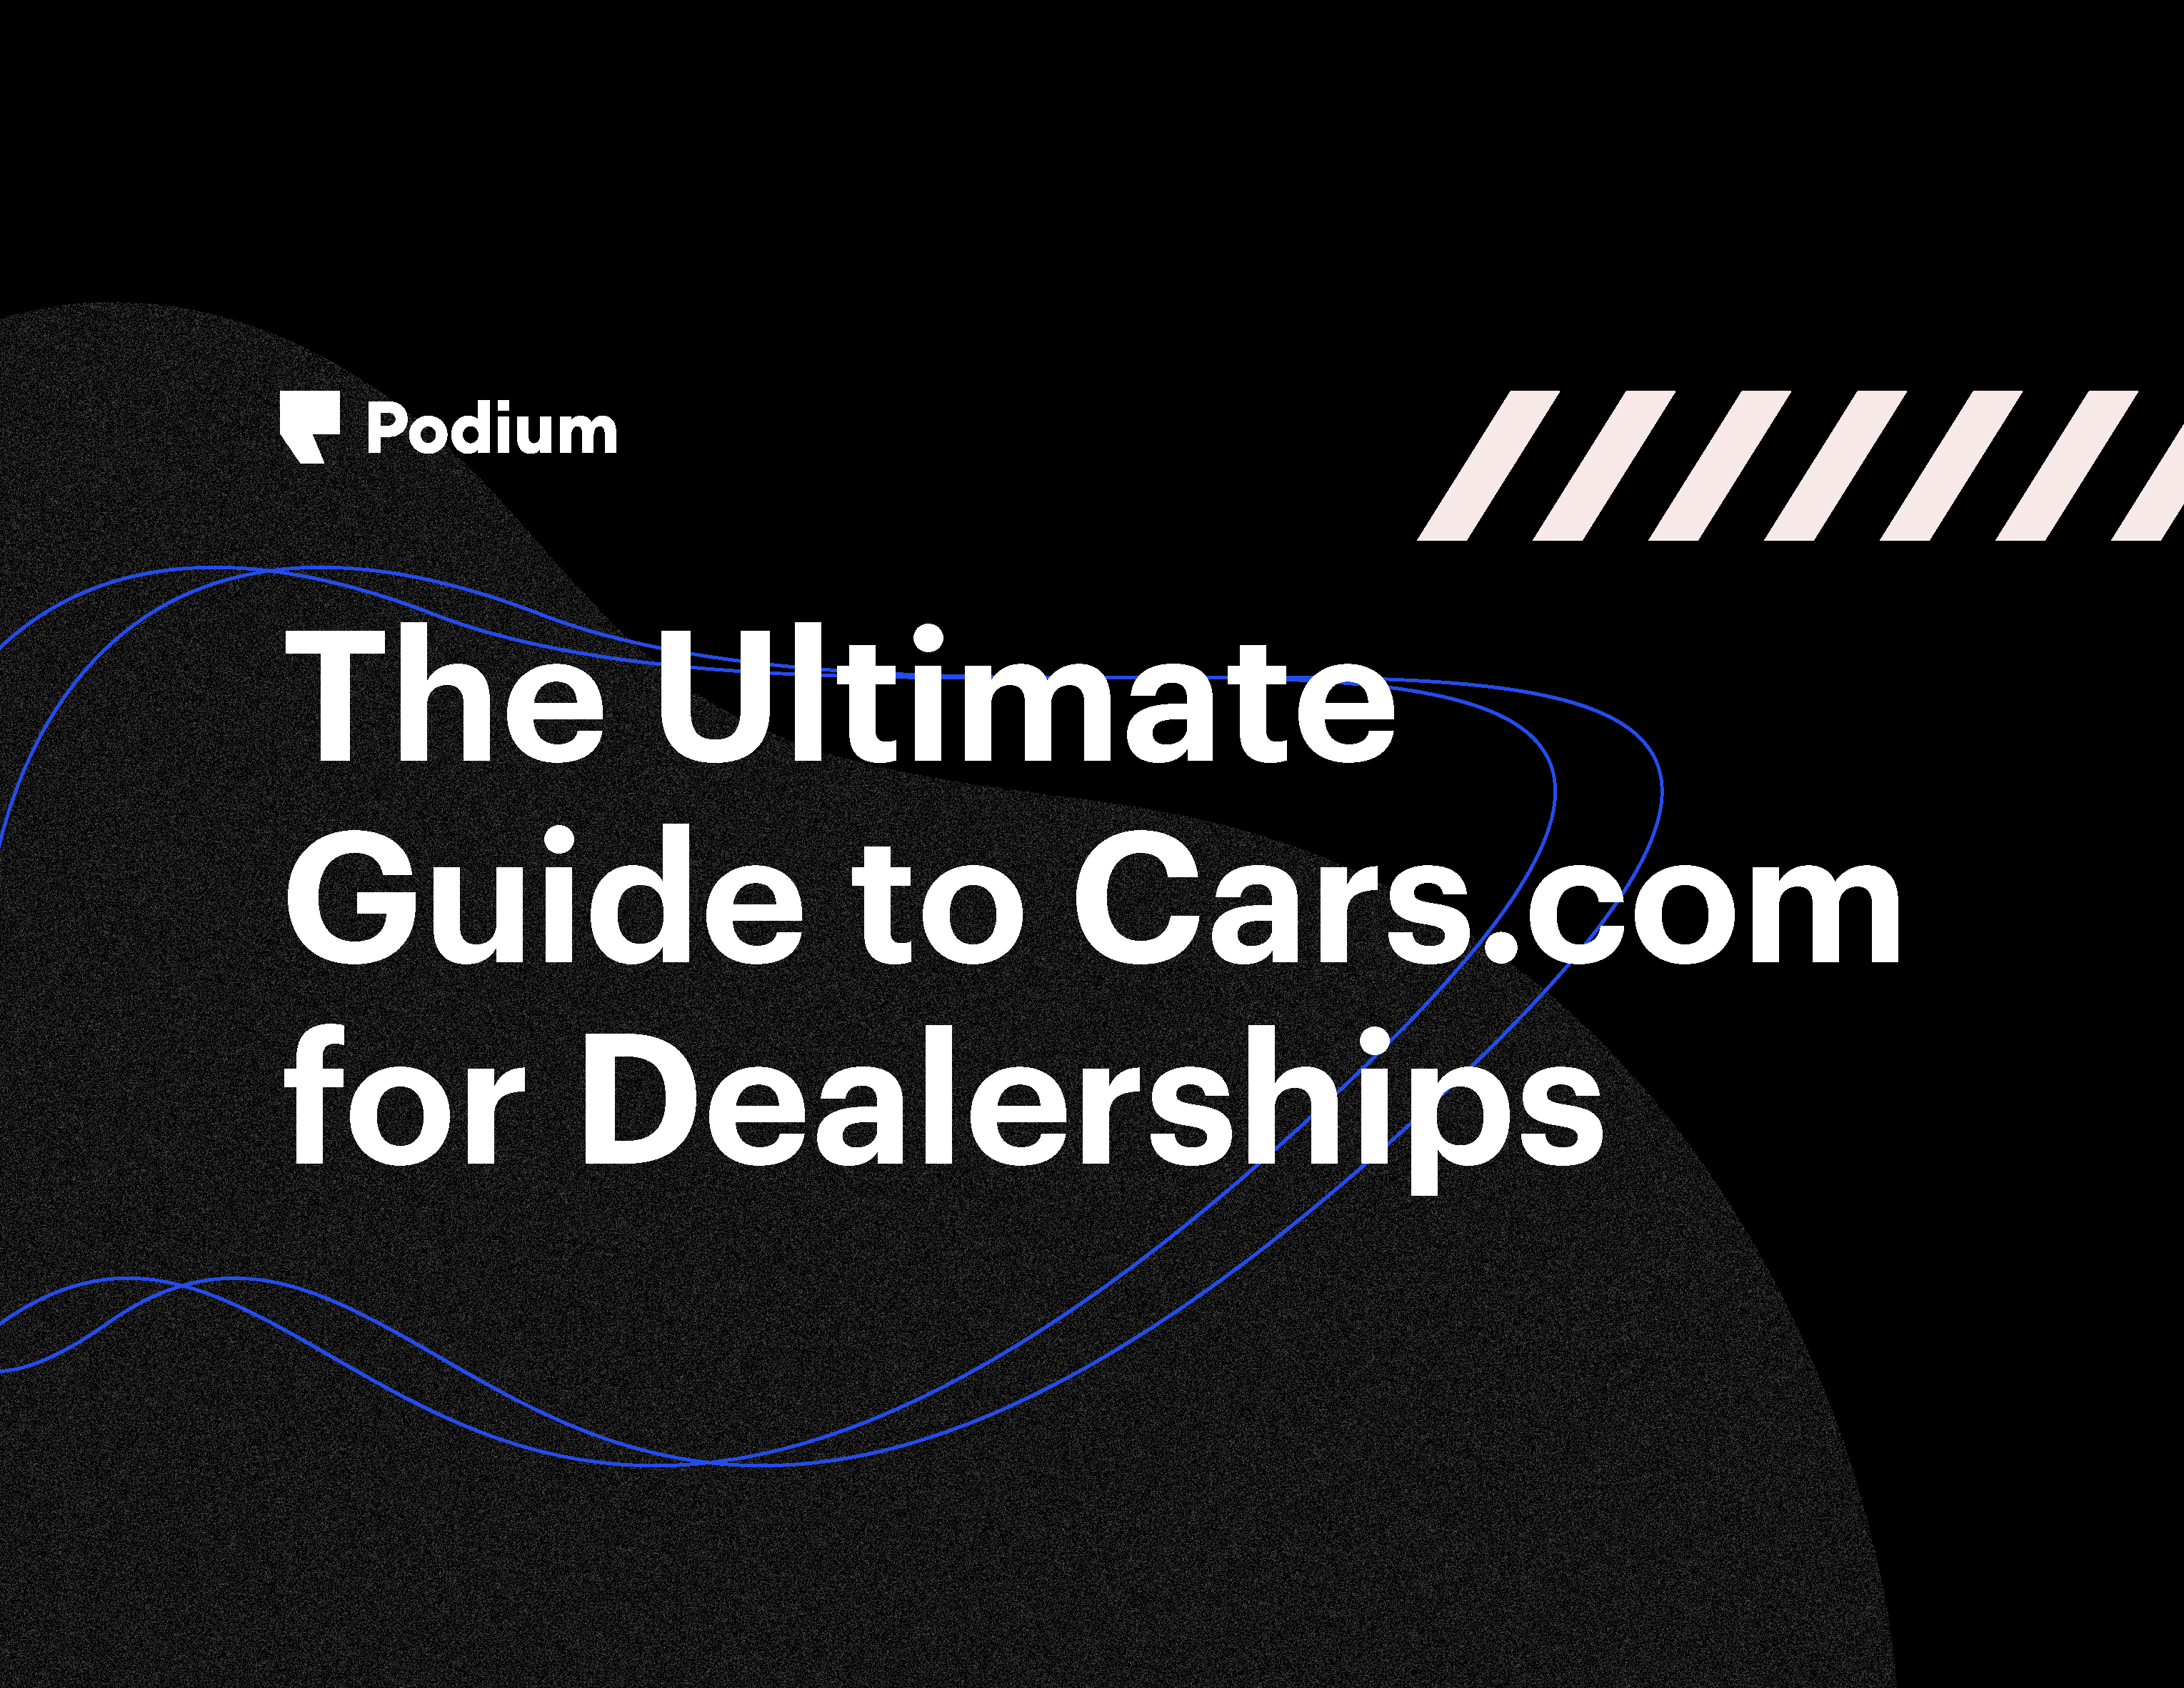 The Ultimate Guide to Cars.com for Dealerships